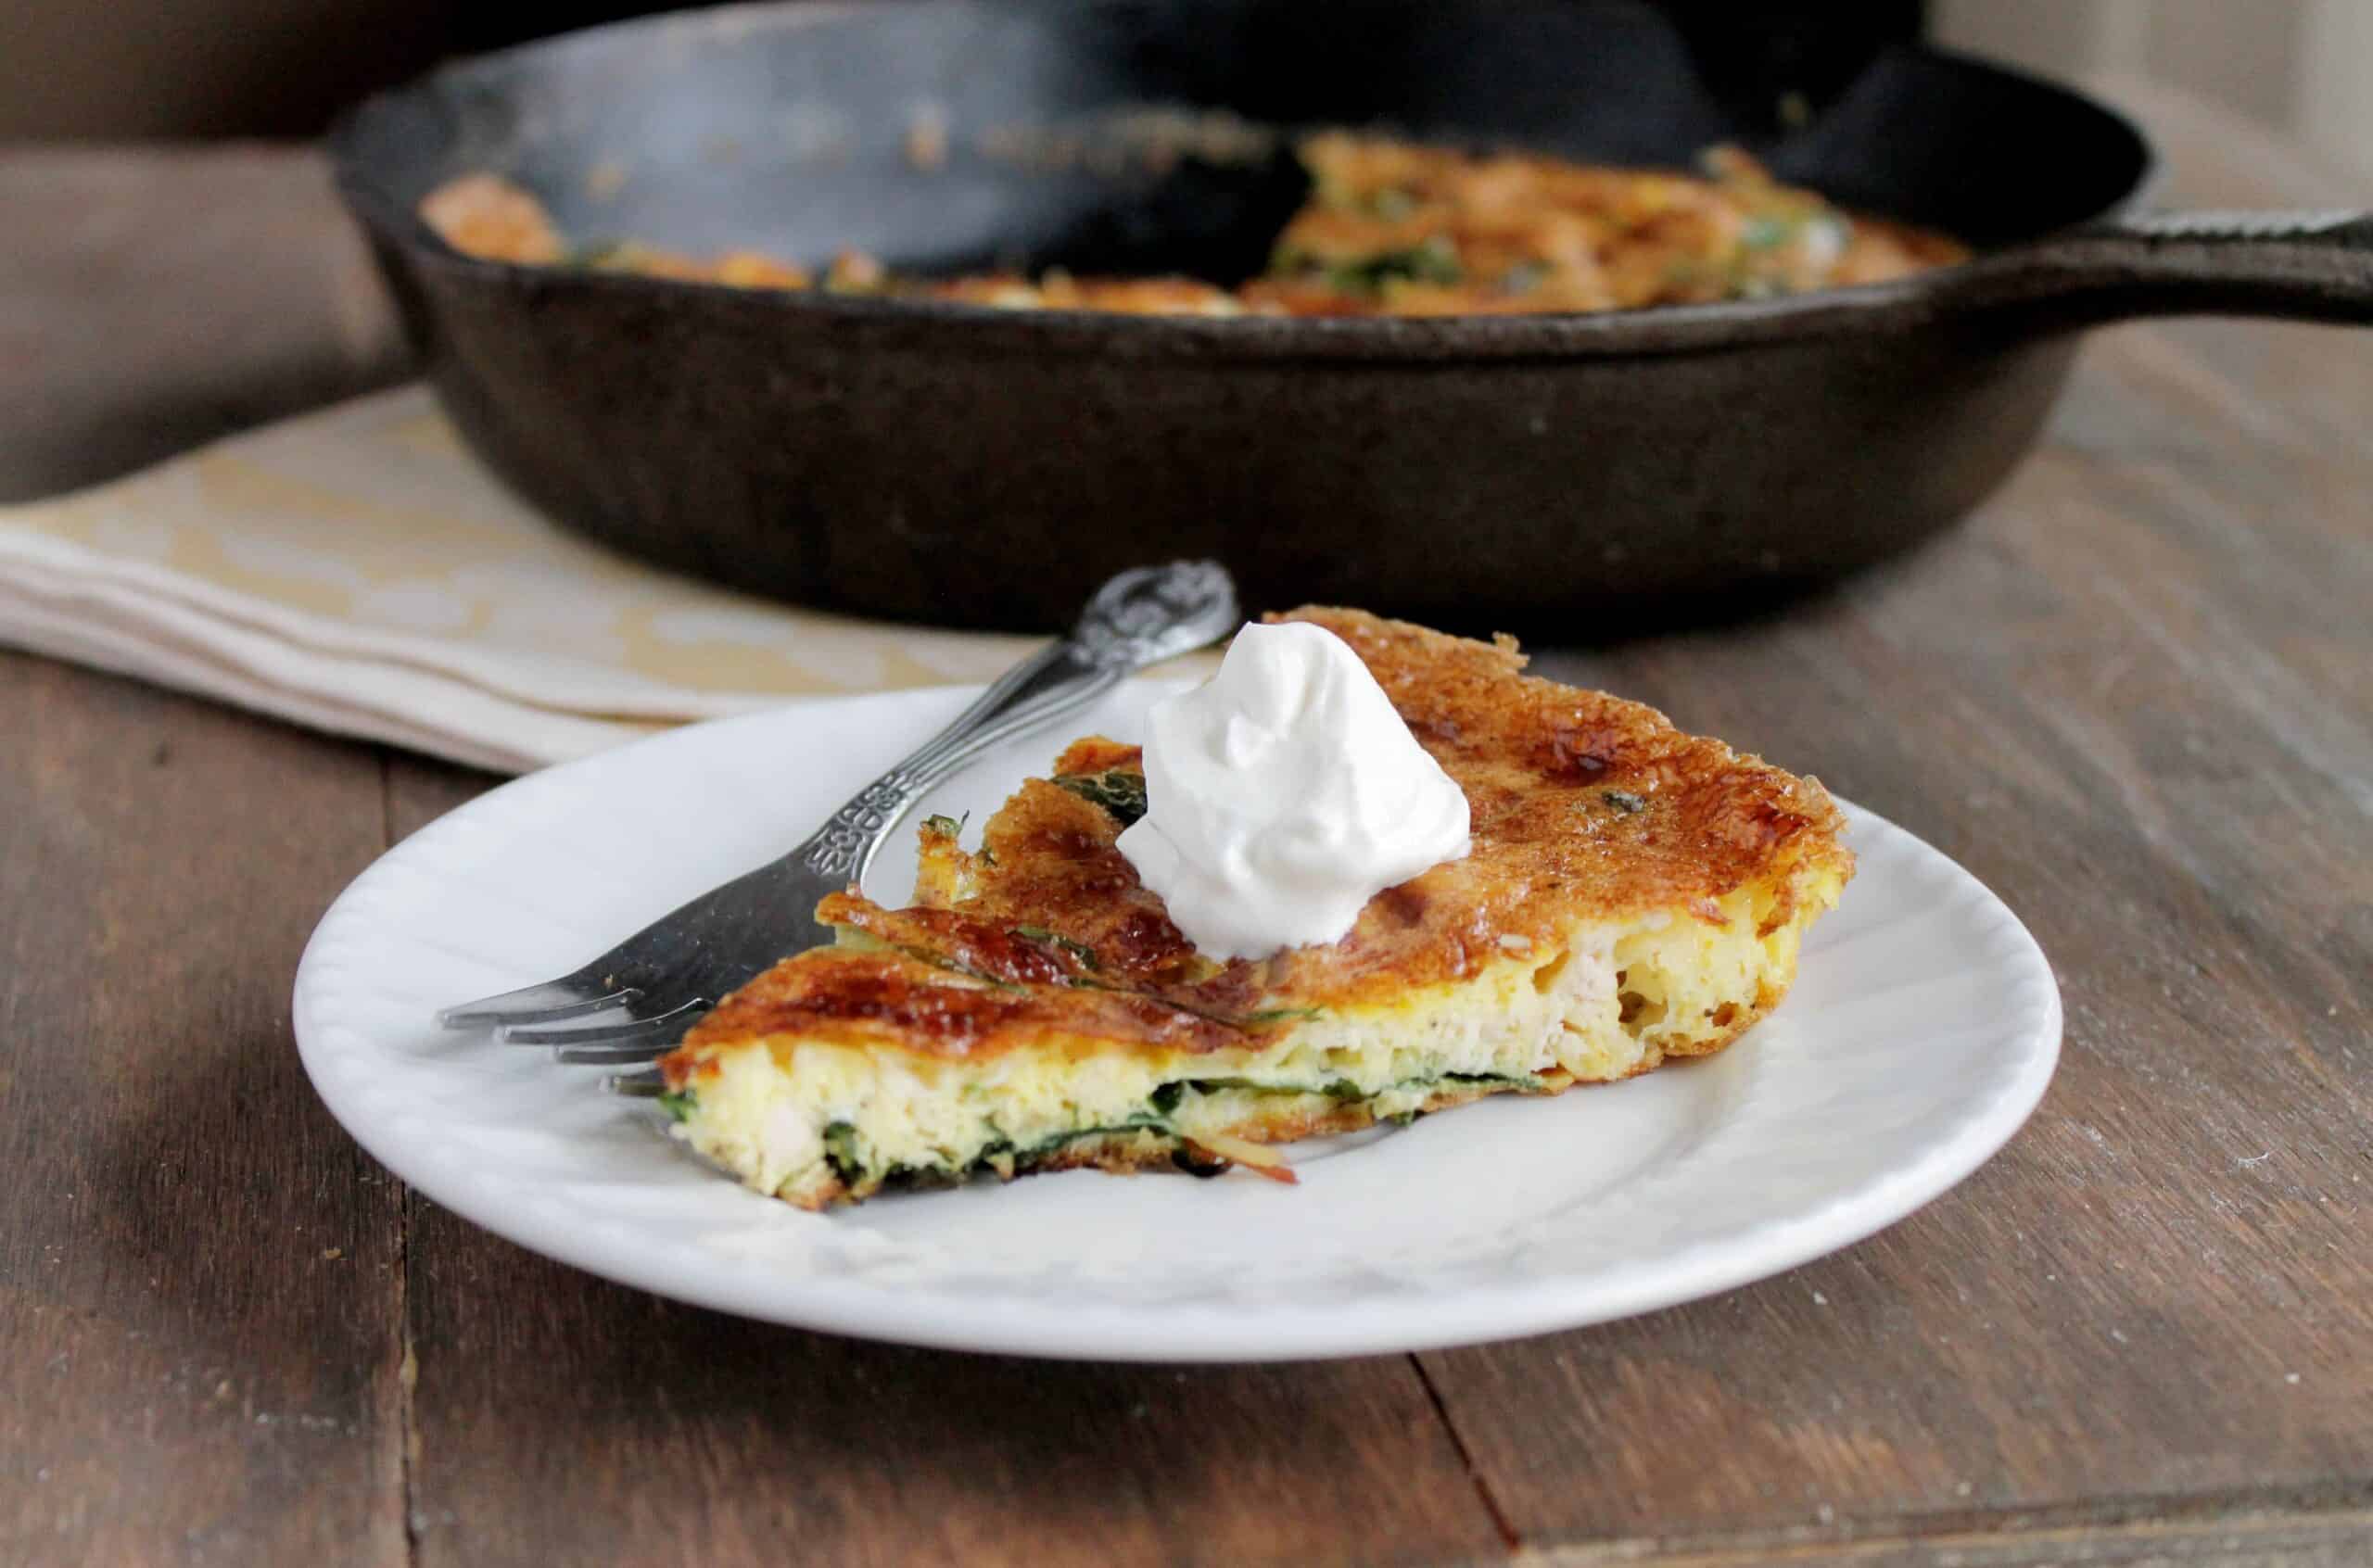 A slice of leftover turkey frittata topped with sour cream, with the skillet in the background.